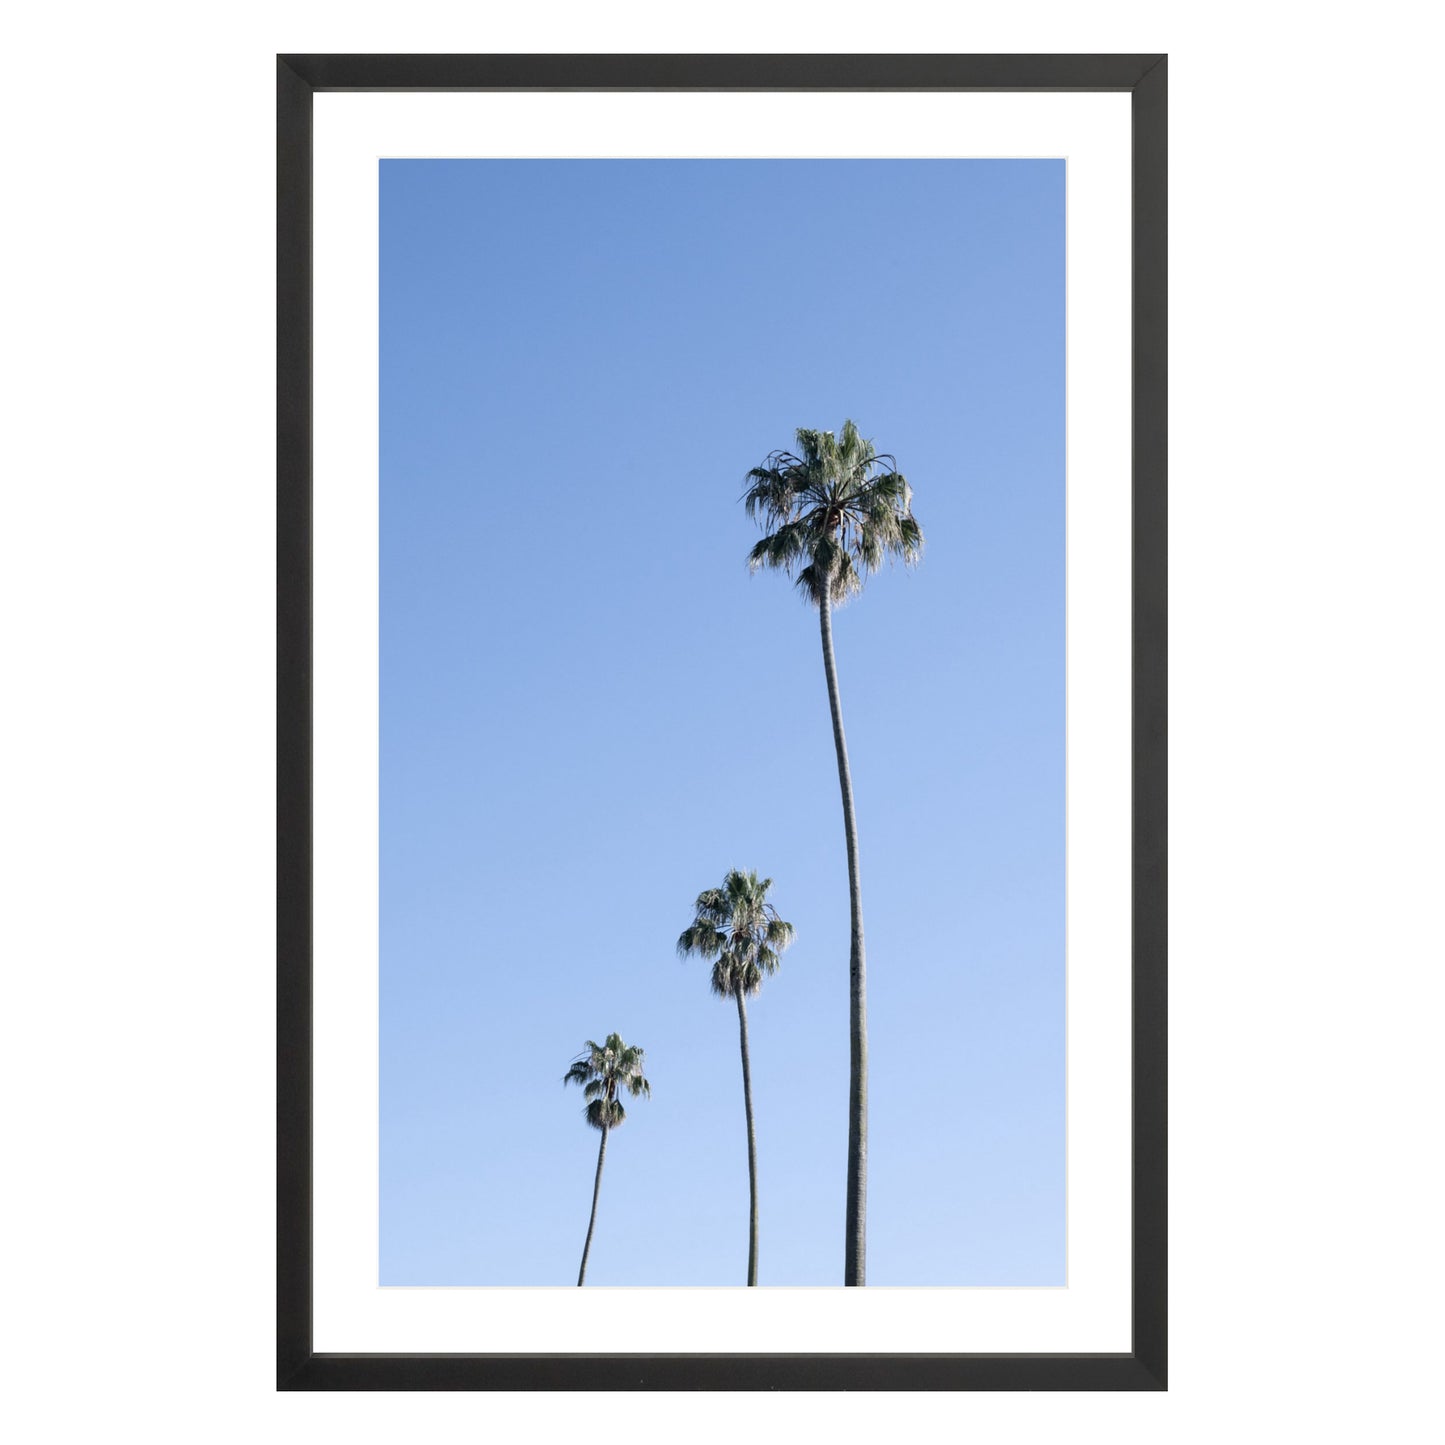 Photograph of three palm trees against blue sky framed in black with white mat